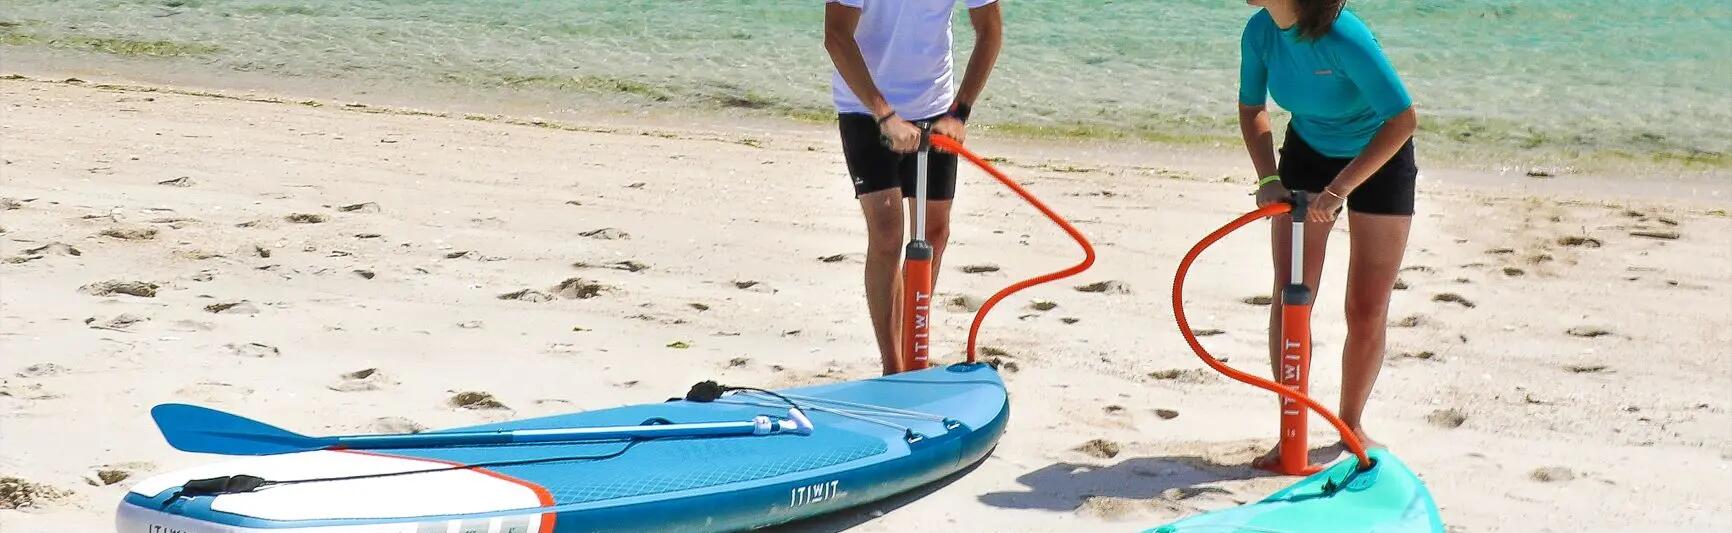 stand-up-paddle-choose-your-pump